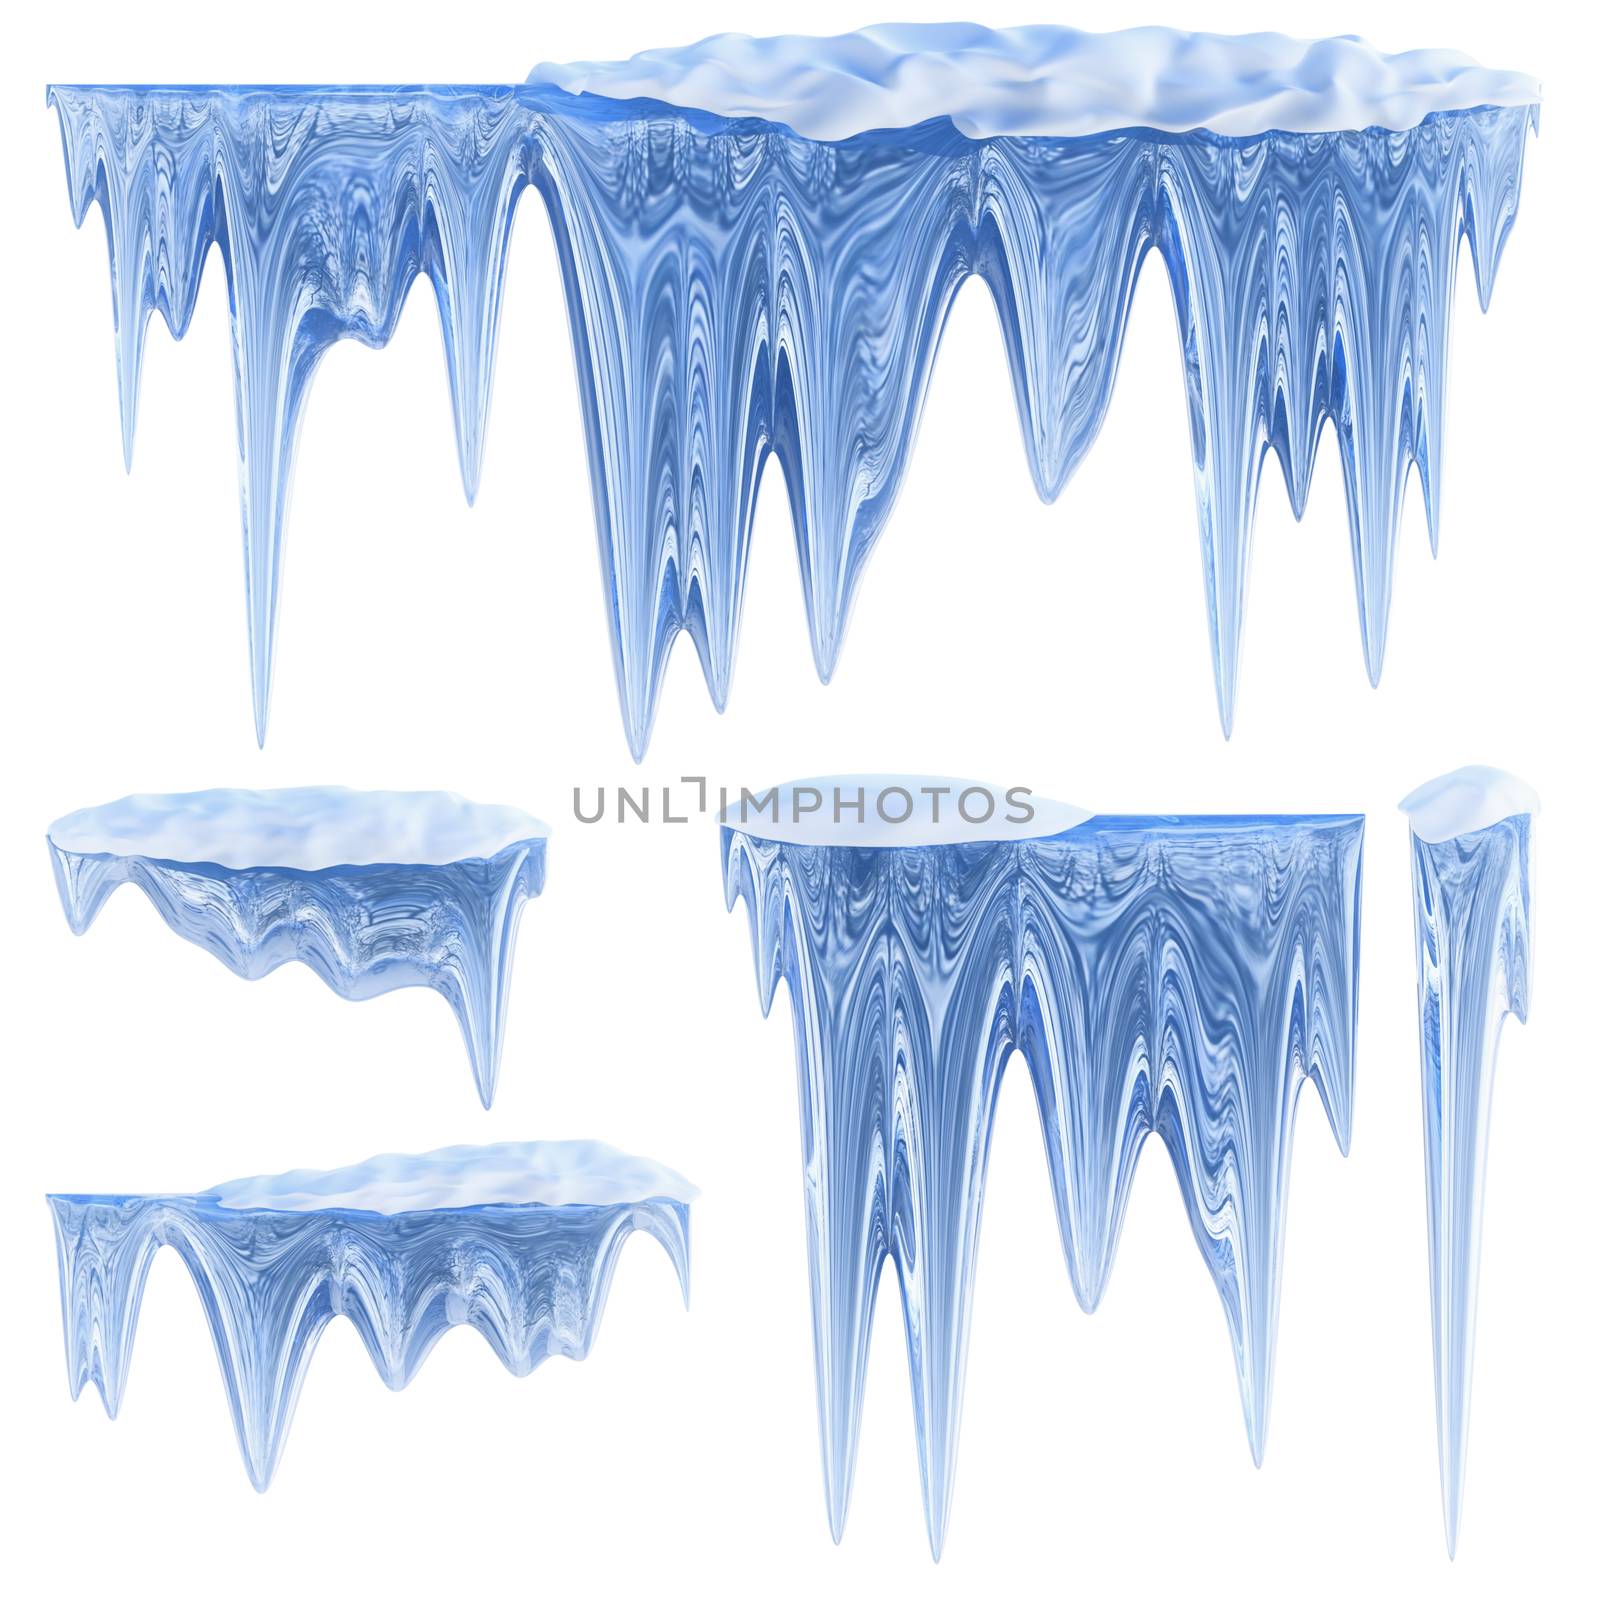 set of hanging thawing and melting blue dripping icicles, as a shiny crystal glass, with crisp spikes in icy winter season time from freezer make around arctic frost with icing on the scene